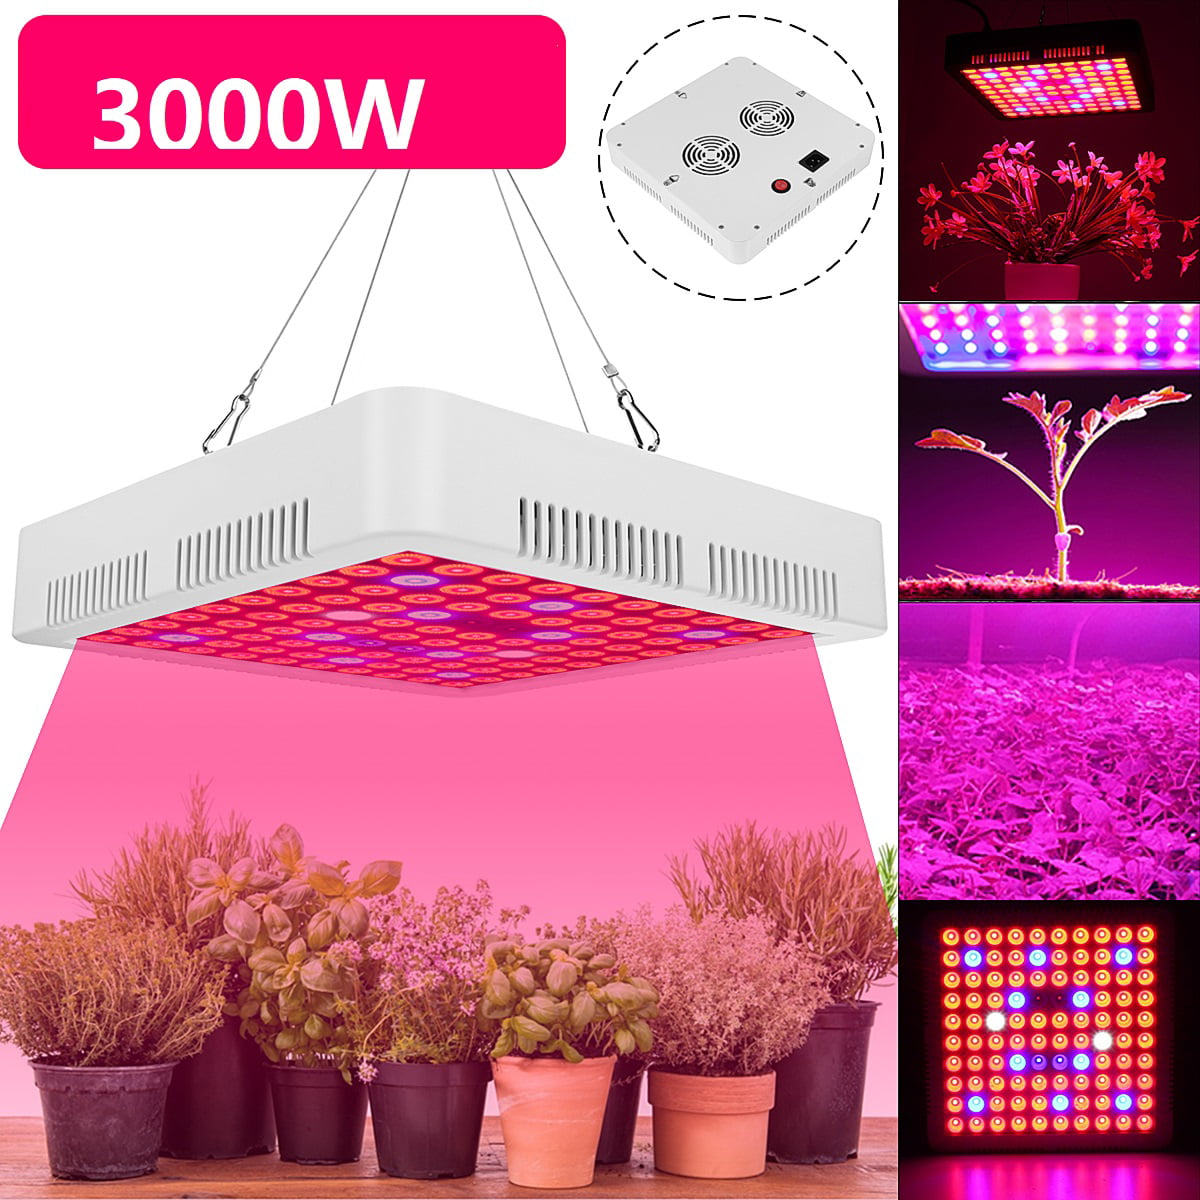 Details about   2000W LED Grow Lights Full Spectrum Indoor Hydroponic Veg Flower Plant Lamp Tube 